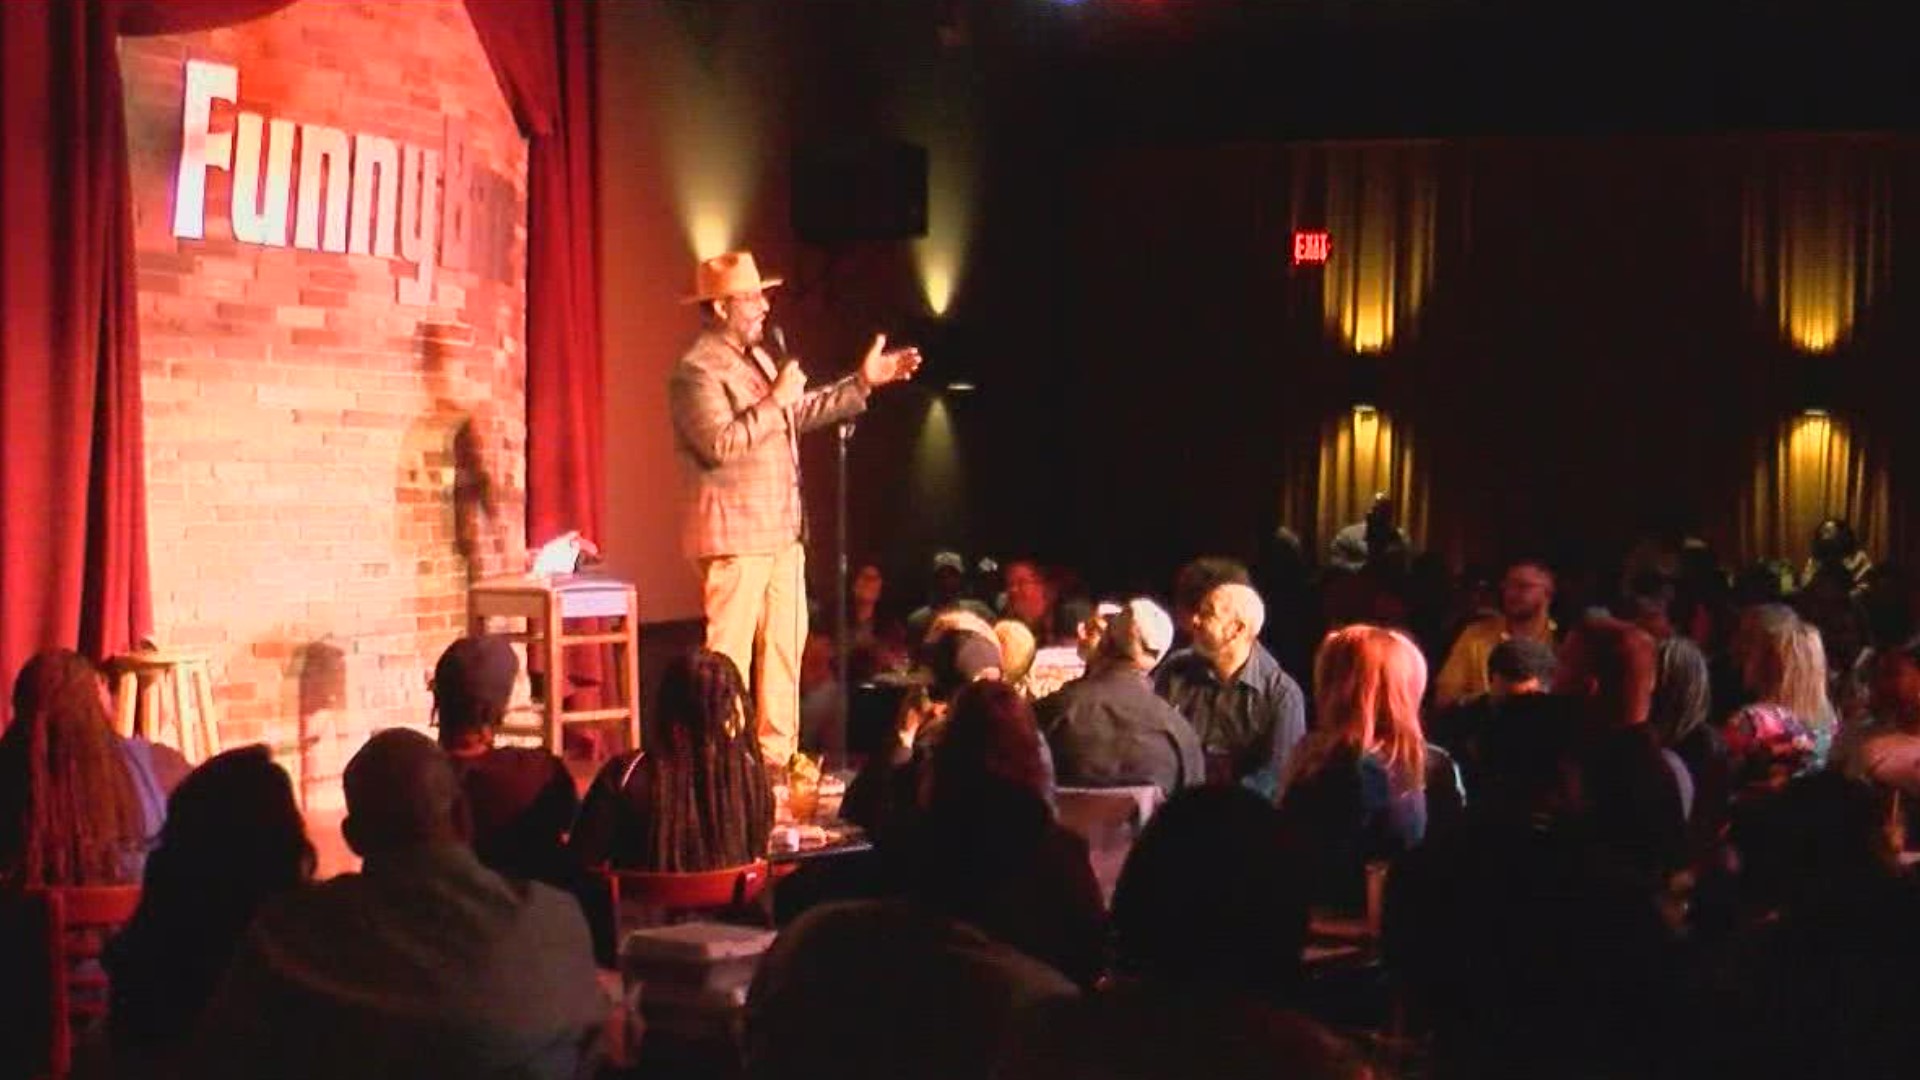 Calling all comedians! Open mic night coming to Funny Bone Comedy Club |  